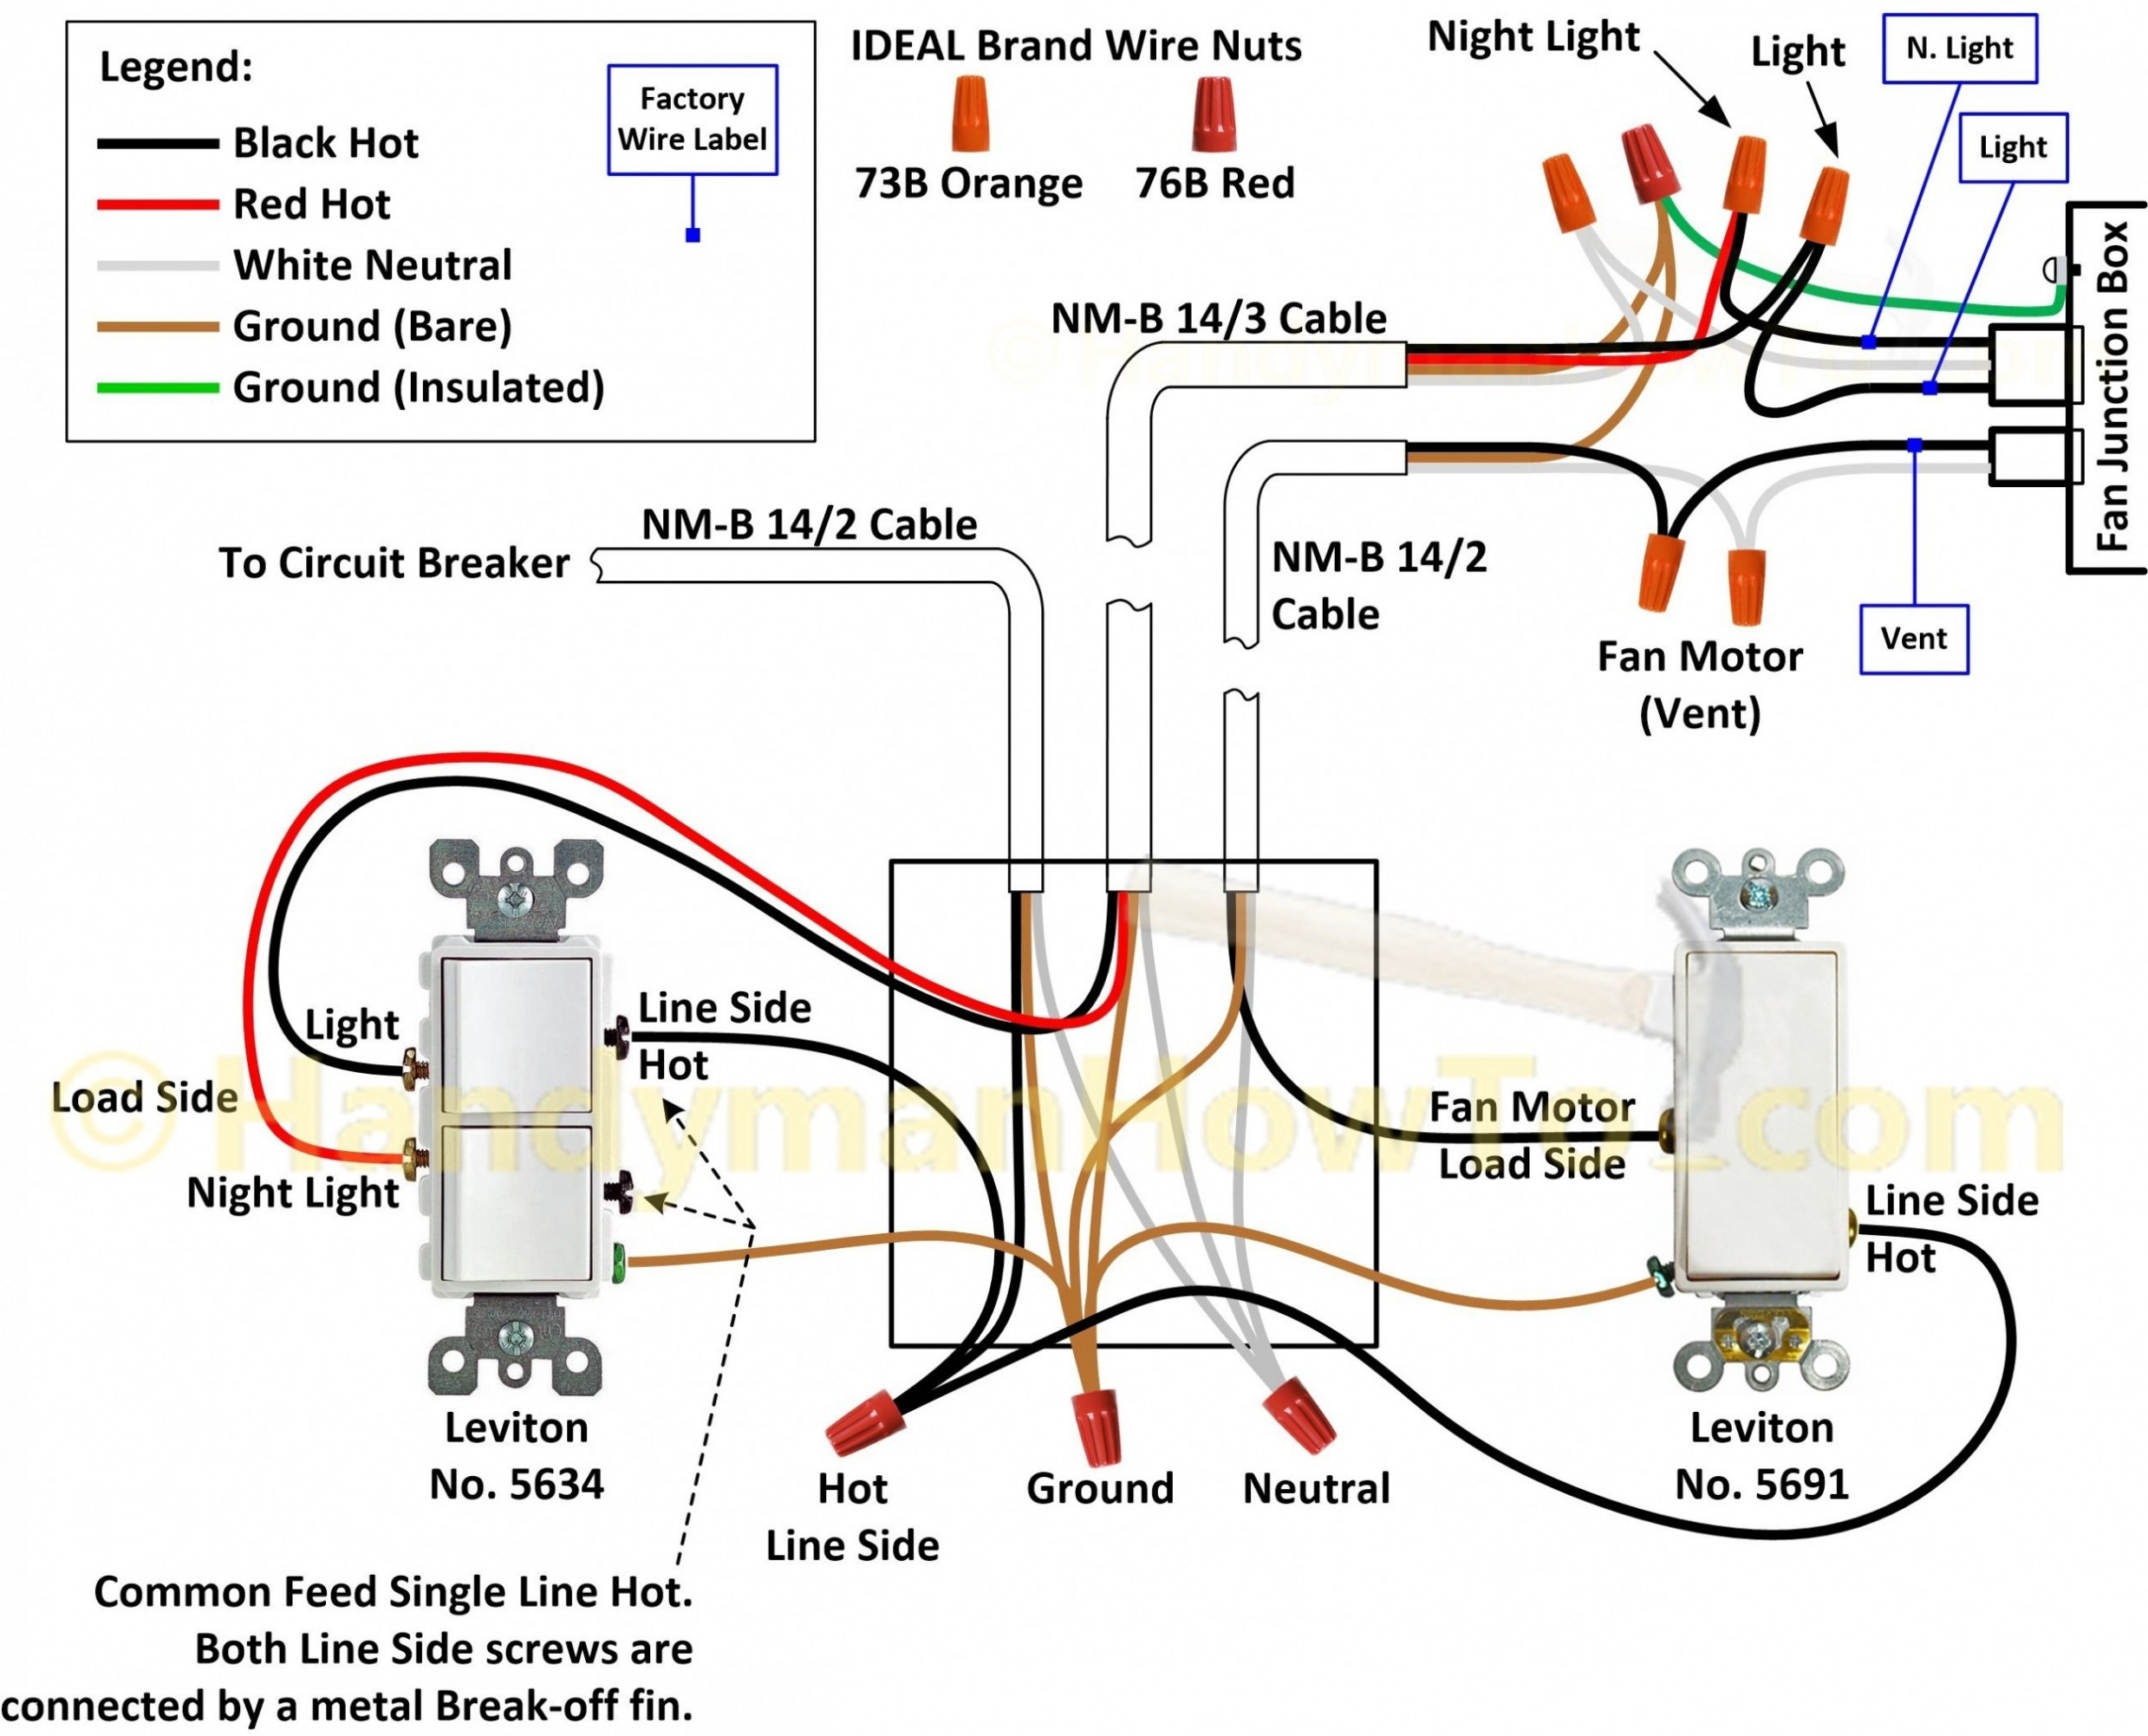 Wiring Diagram For Multiple Ceiling Lights Fresh 4 Way Switch Wiring – 4 Way Switch Diagram